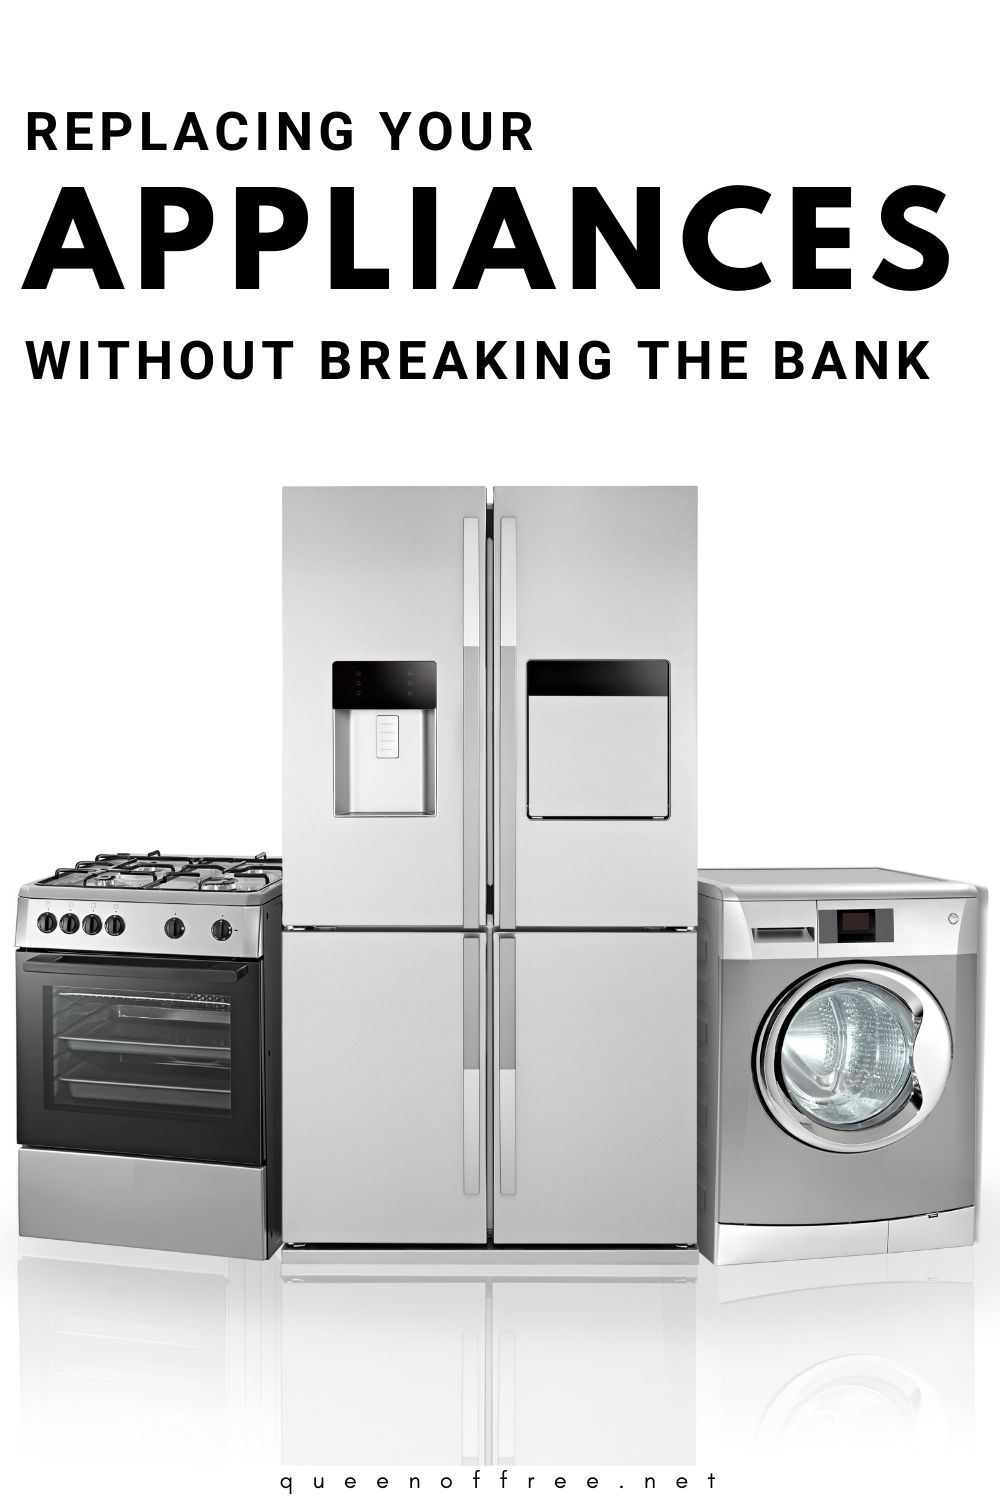 Replacing Appliances is never fun. But, these simple strategies will keep your finances on track and your household running smoothly.